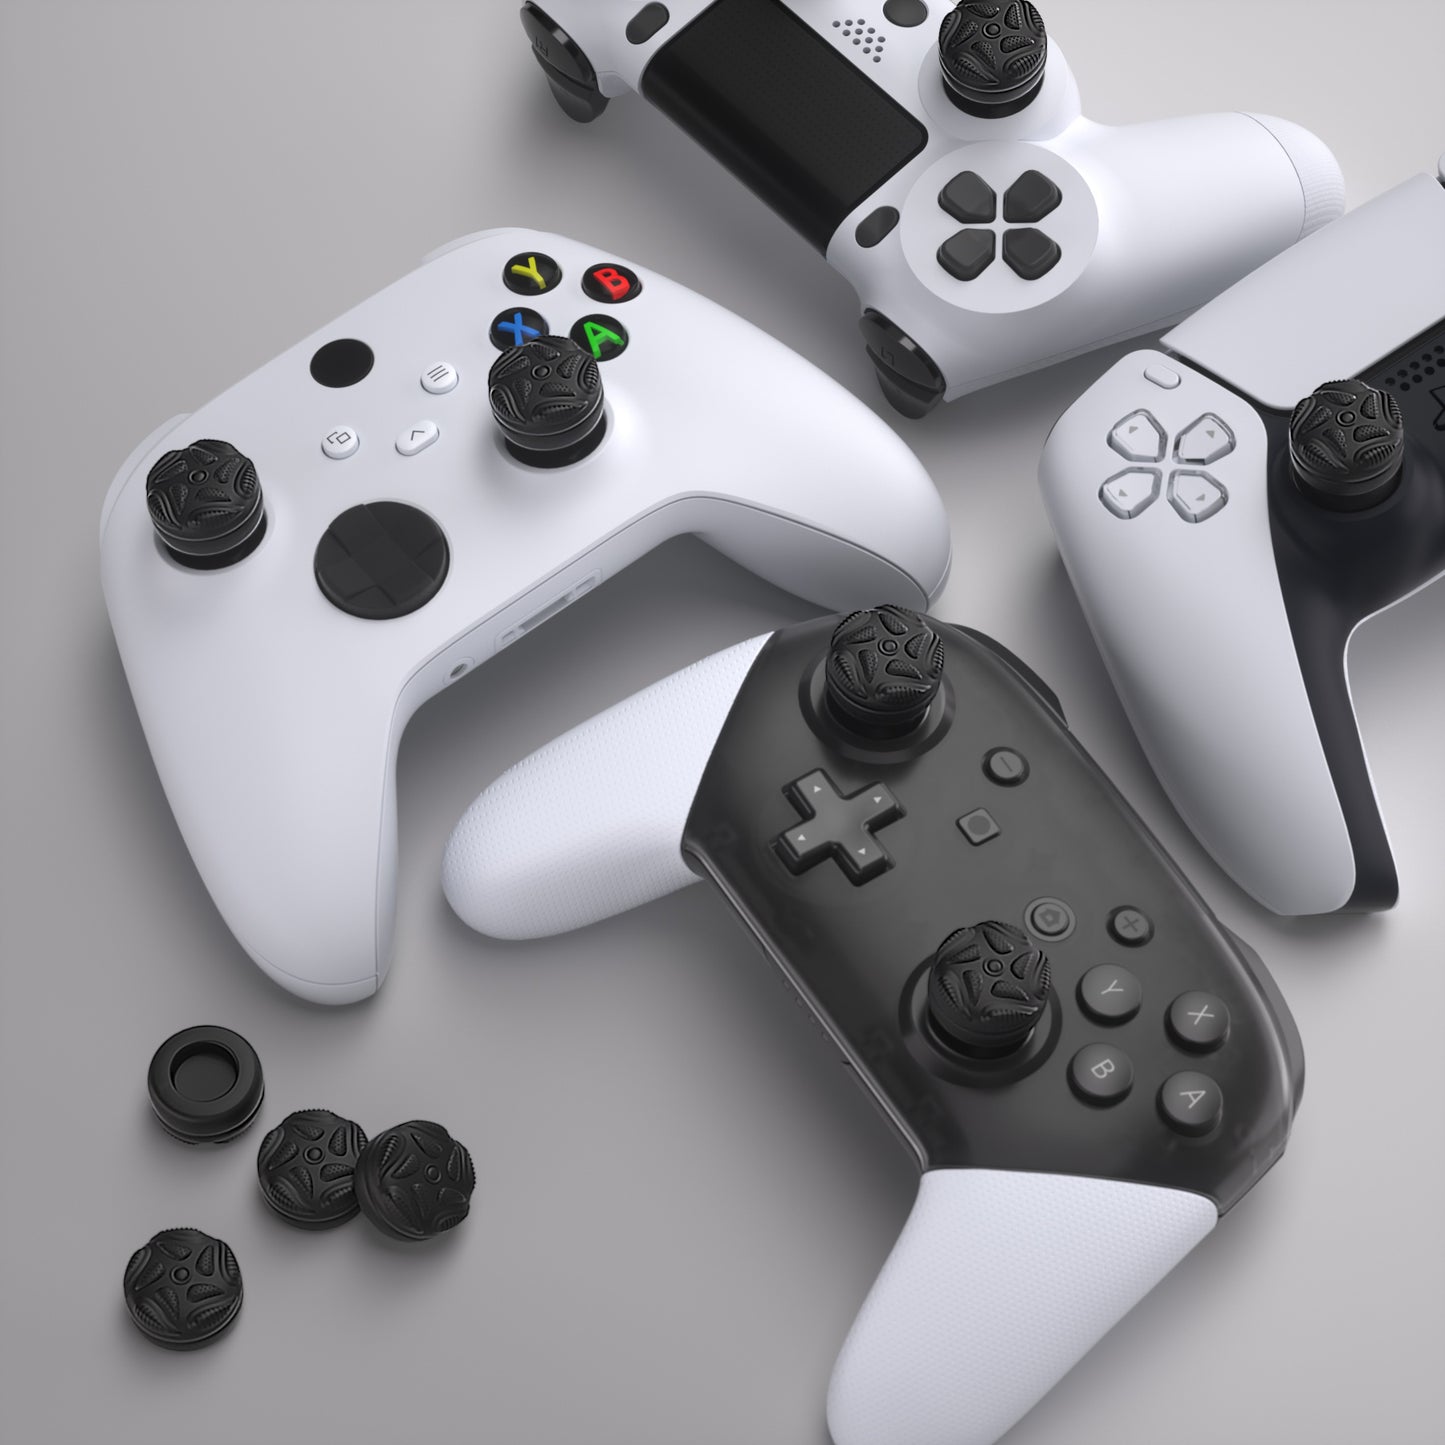 PlayVital Thumbs Cushion Caps Thumb Grips for ps5/4, Thumbstick Grip Cover for Xbox Series X/S, Thumb Grip Caps for Xbox One, Elite Series 2, for Switch Pro Controller - Raindrop Texture Design Black - PJM3033 PlayVital